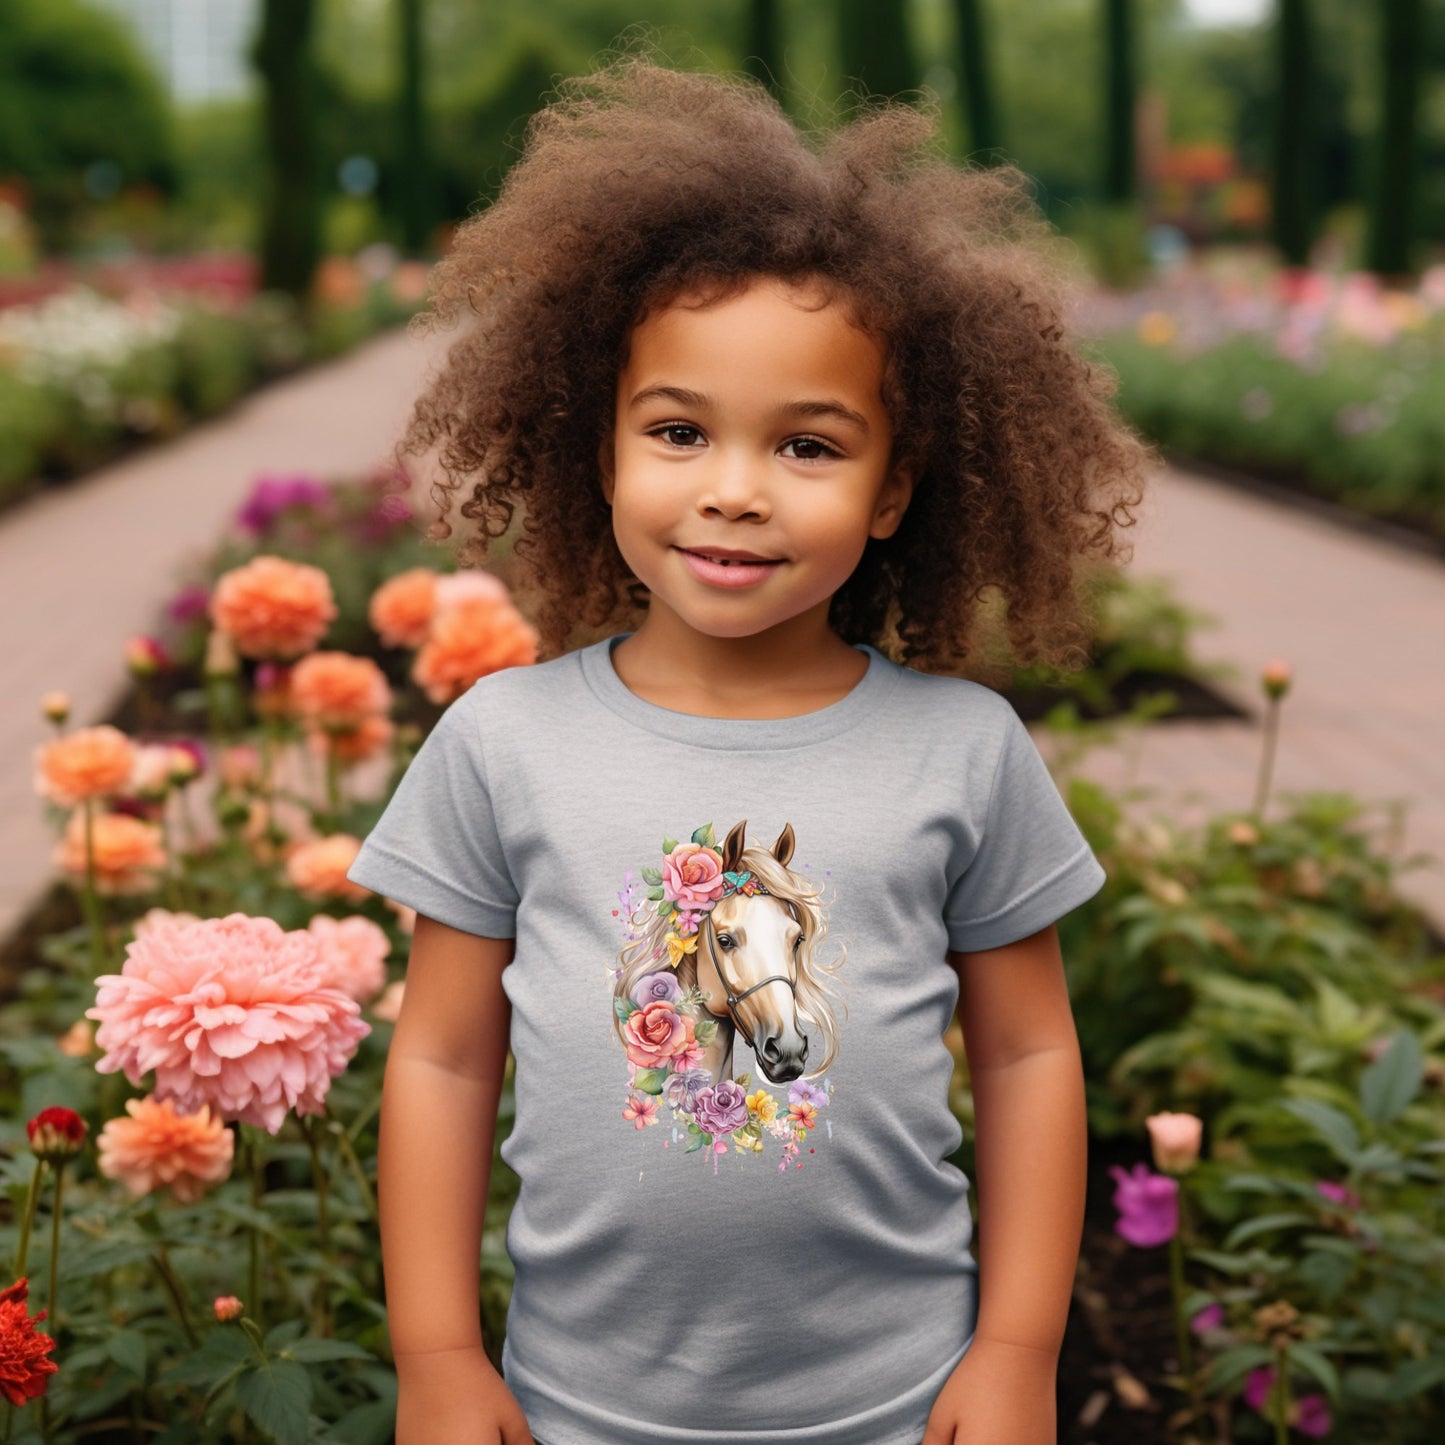 Personalized Girls Horse Shirt - Horses and Roses Toddler & Youth Tees for Horse Lover Girls - FlooredByArt